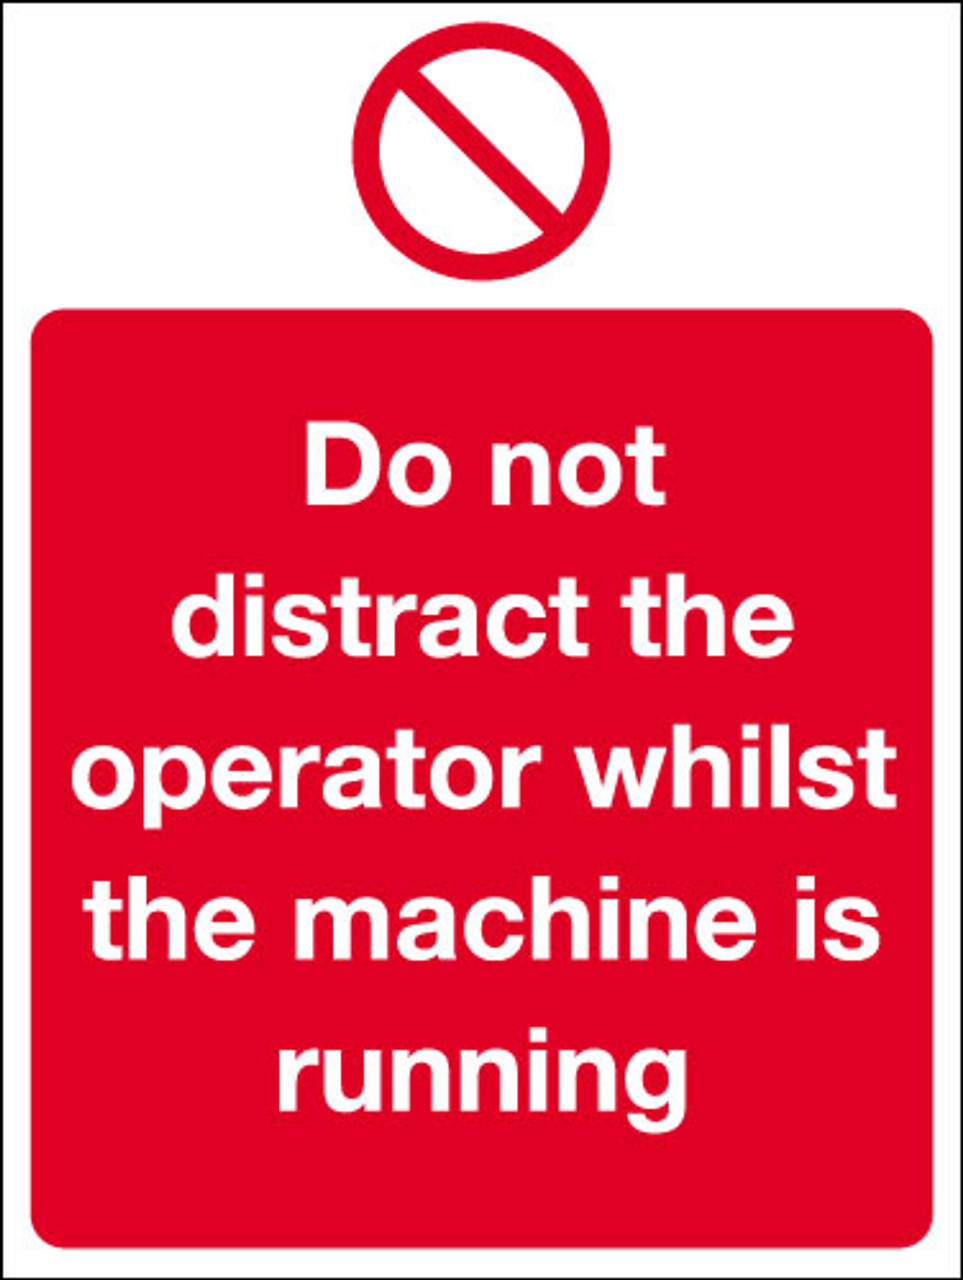 Do not distract the operator whilst the machine is running